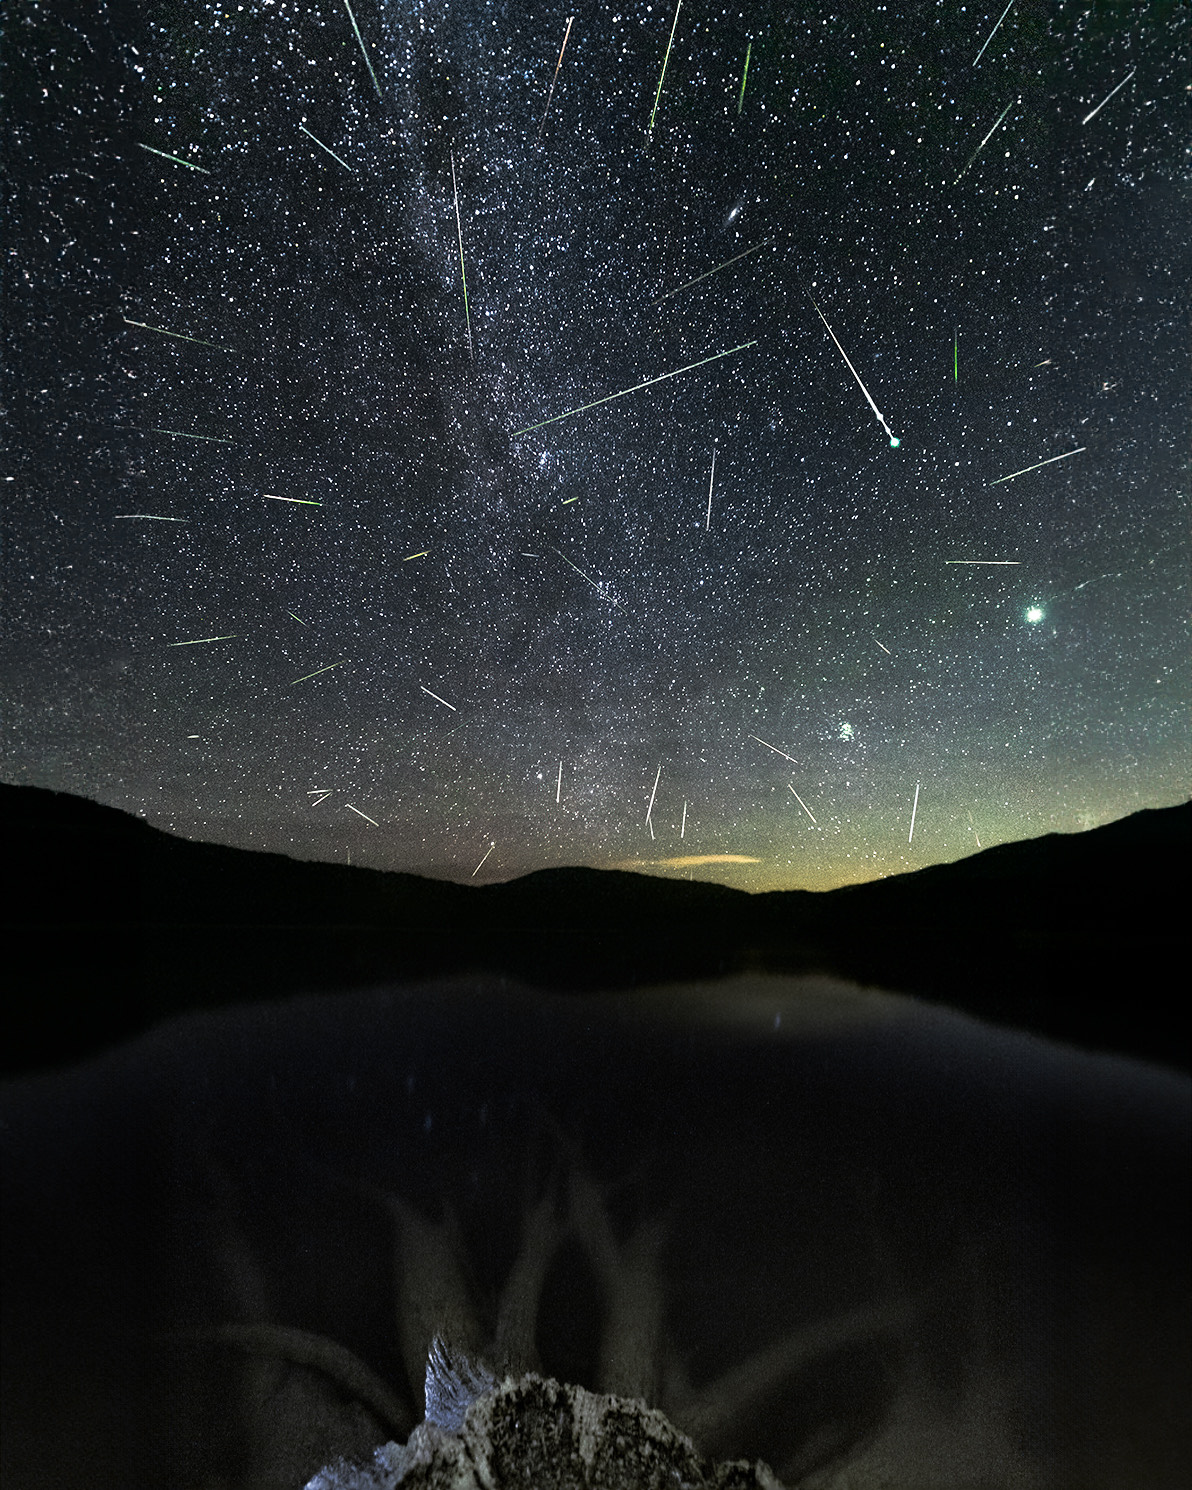 A meteor shower is depicted against a starry sky and a scenic foreground